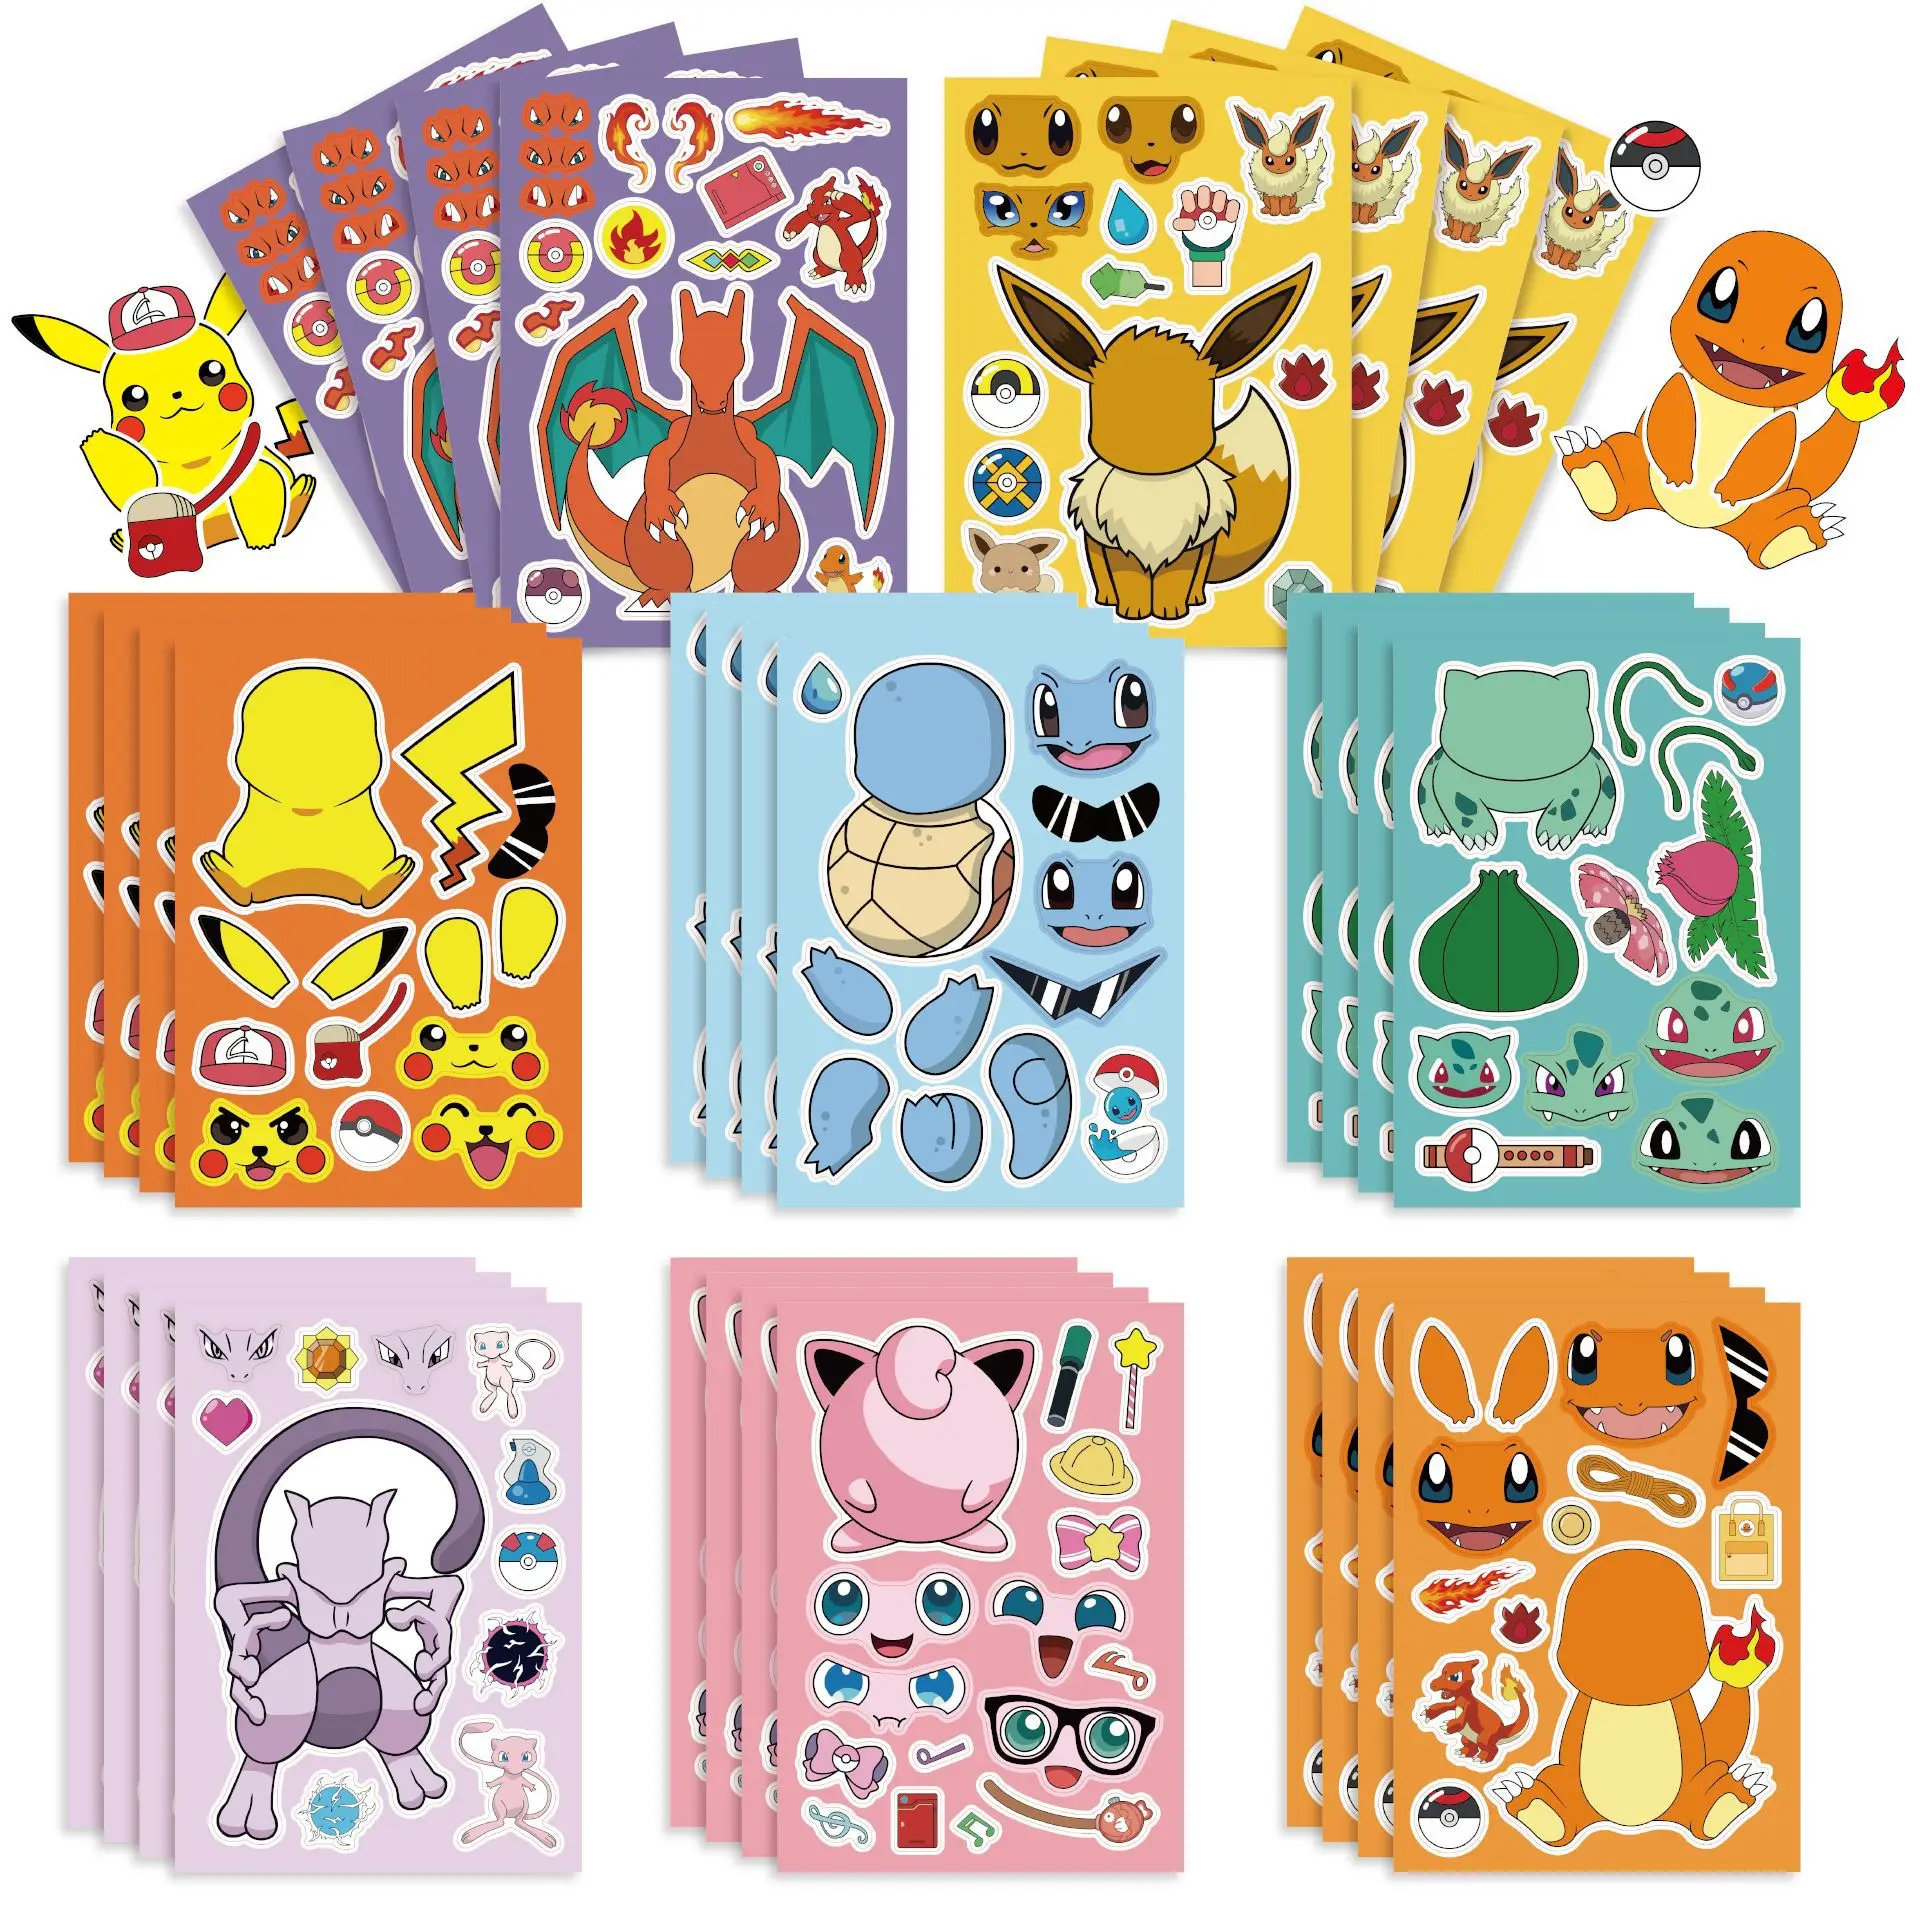 

12Pcs Anime Pokemon Action Figure Pikachu Bulbasaur Squirtle Puzzle Stickers DIY Jigsaw Sticker For Kid Collectible Sticker Toy